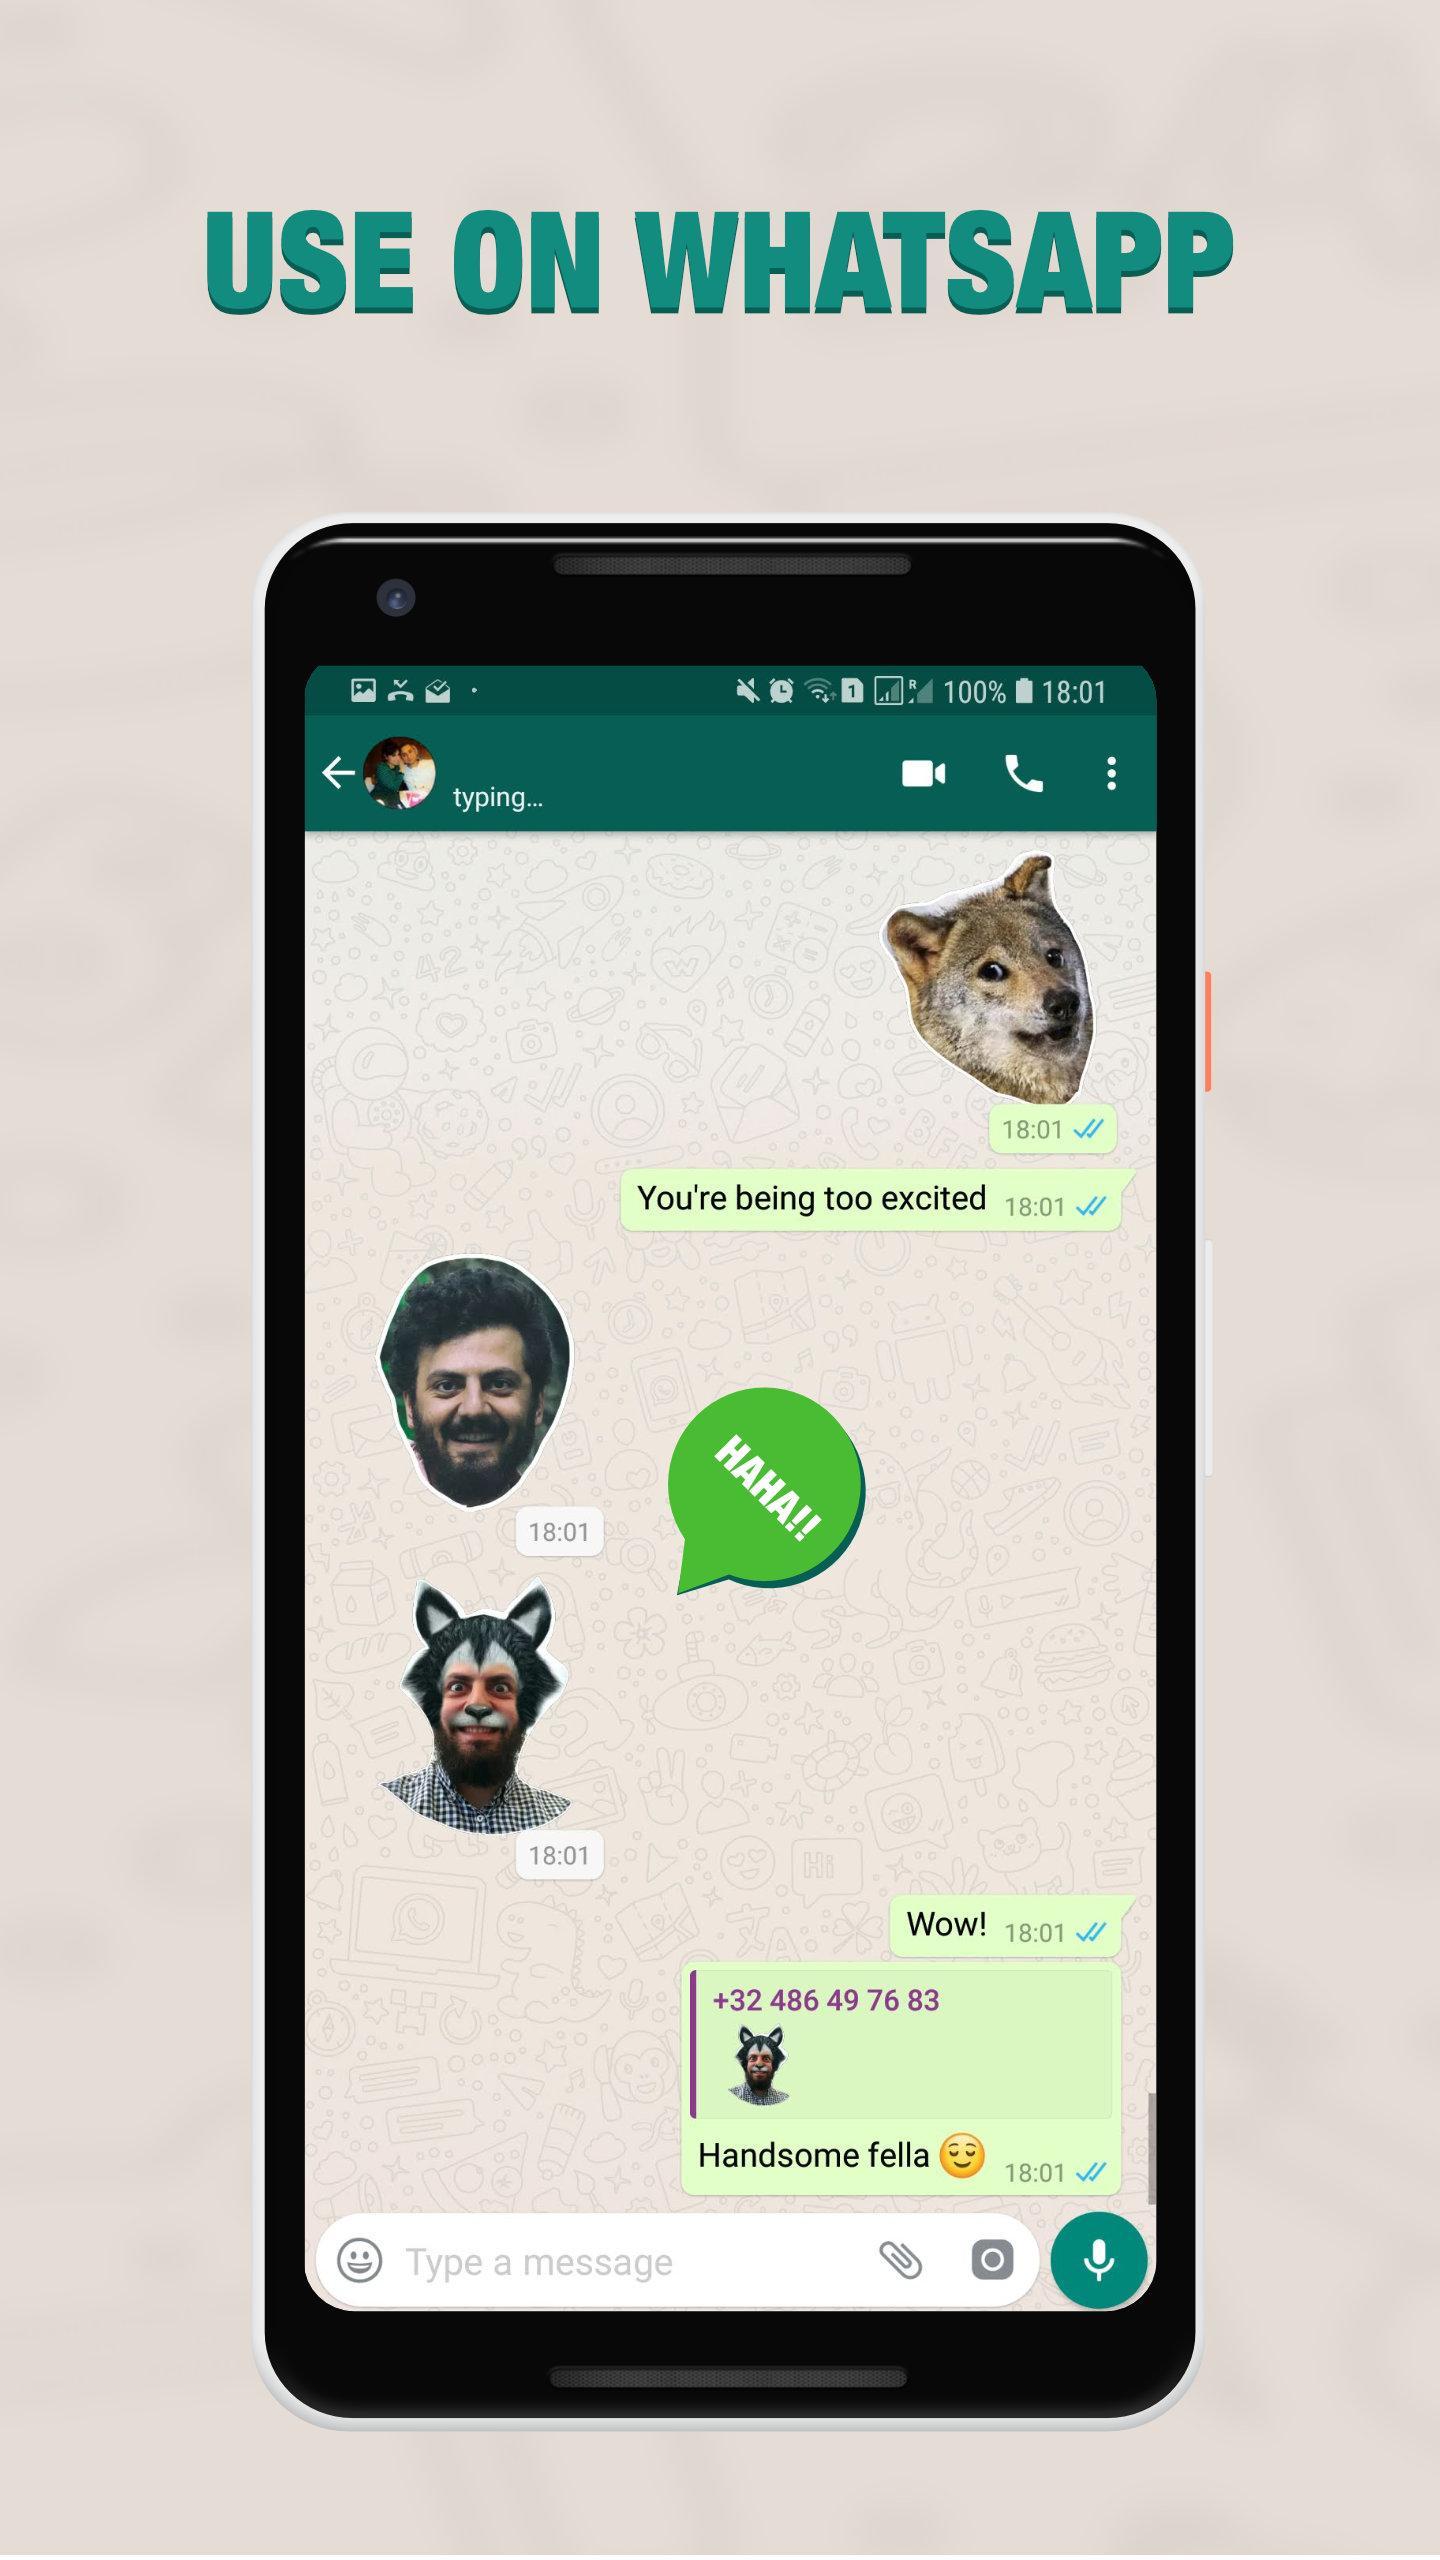 Sticker Maker For Android Apk Download